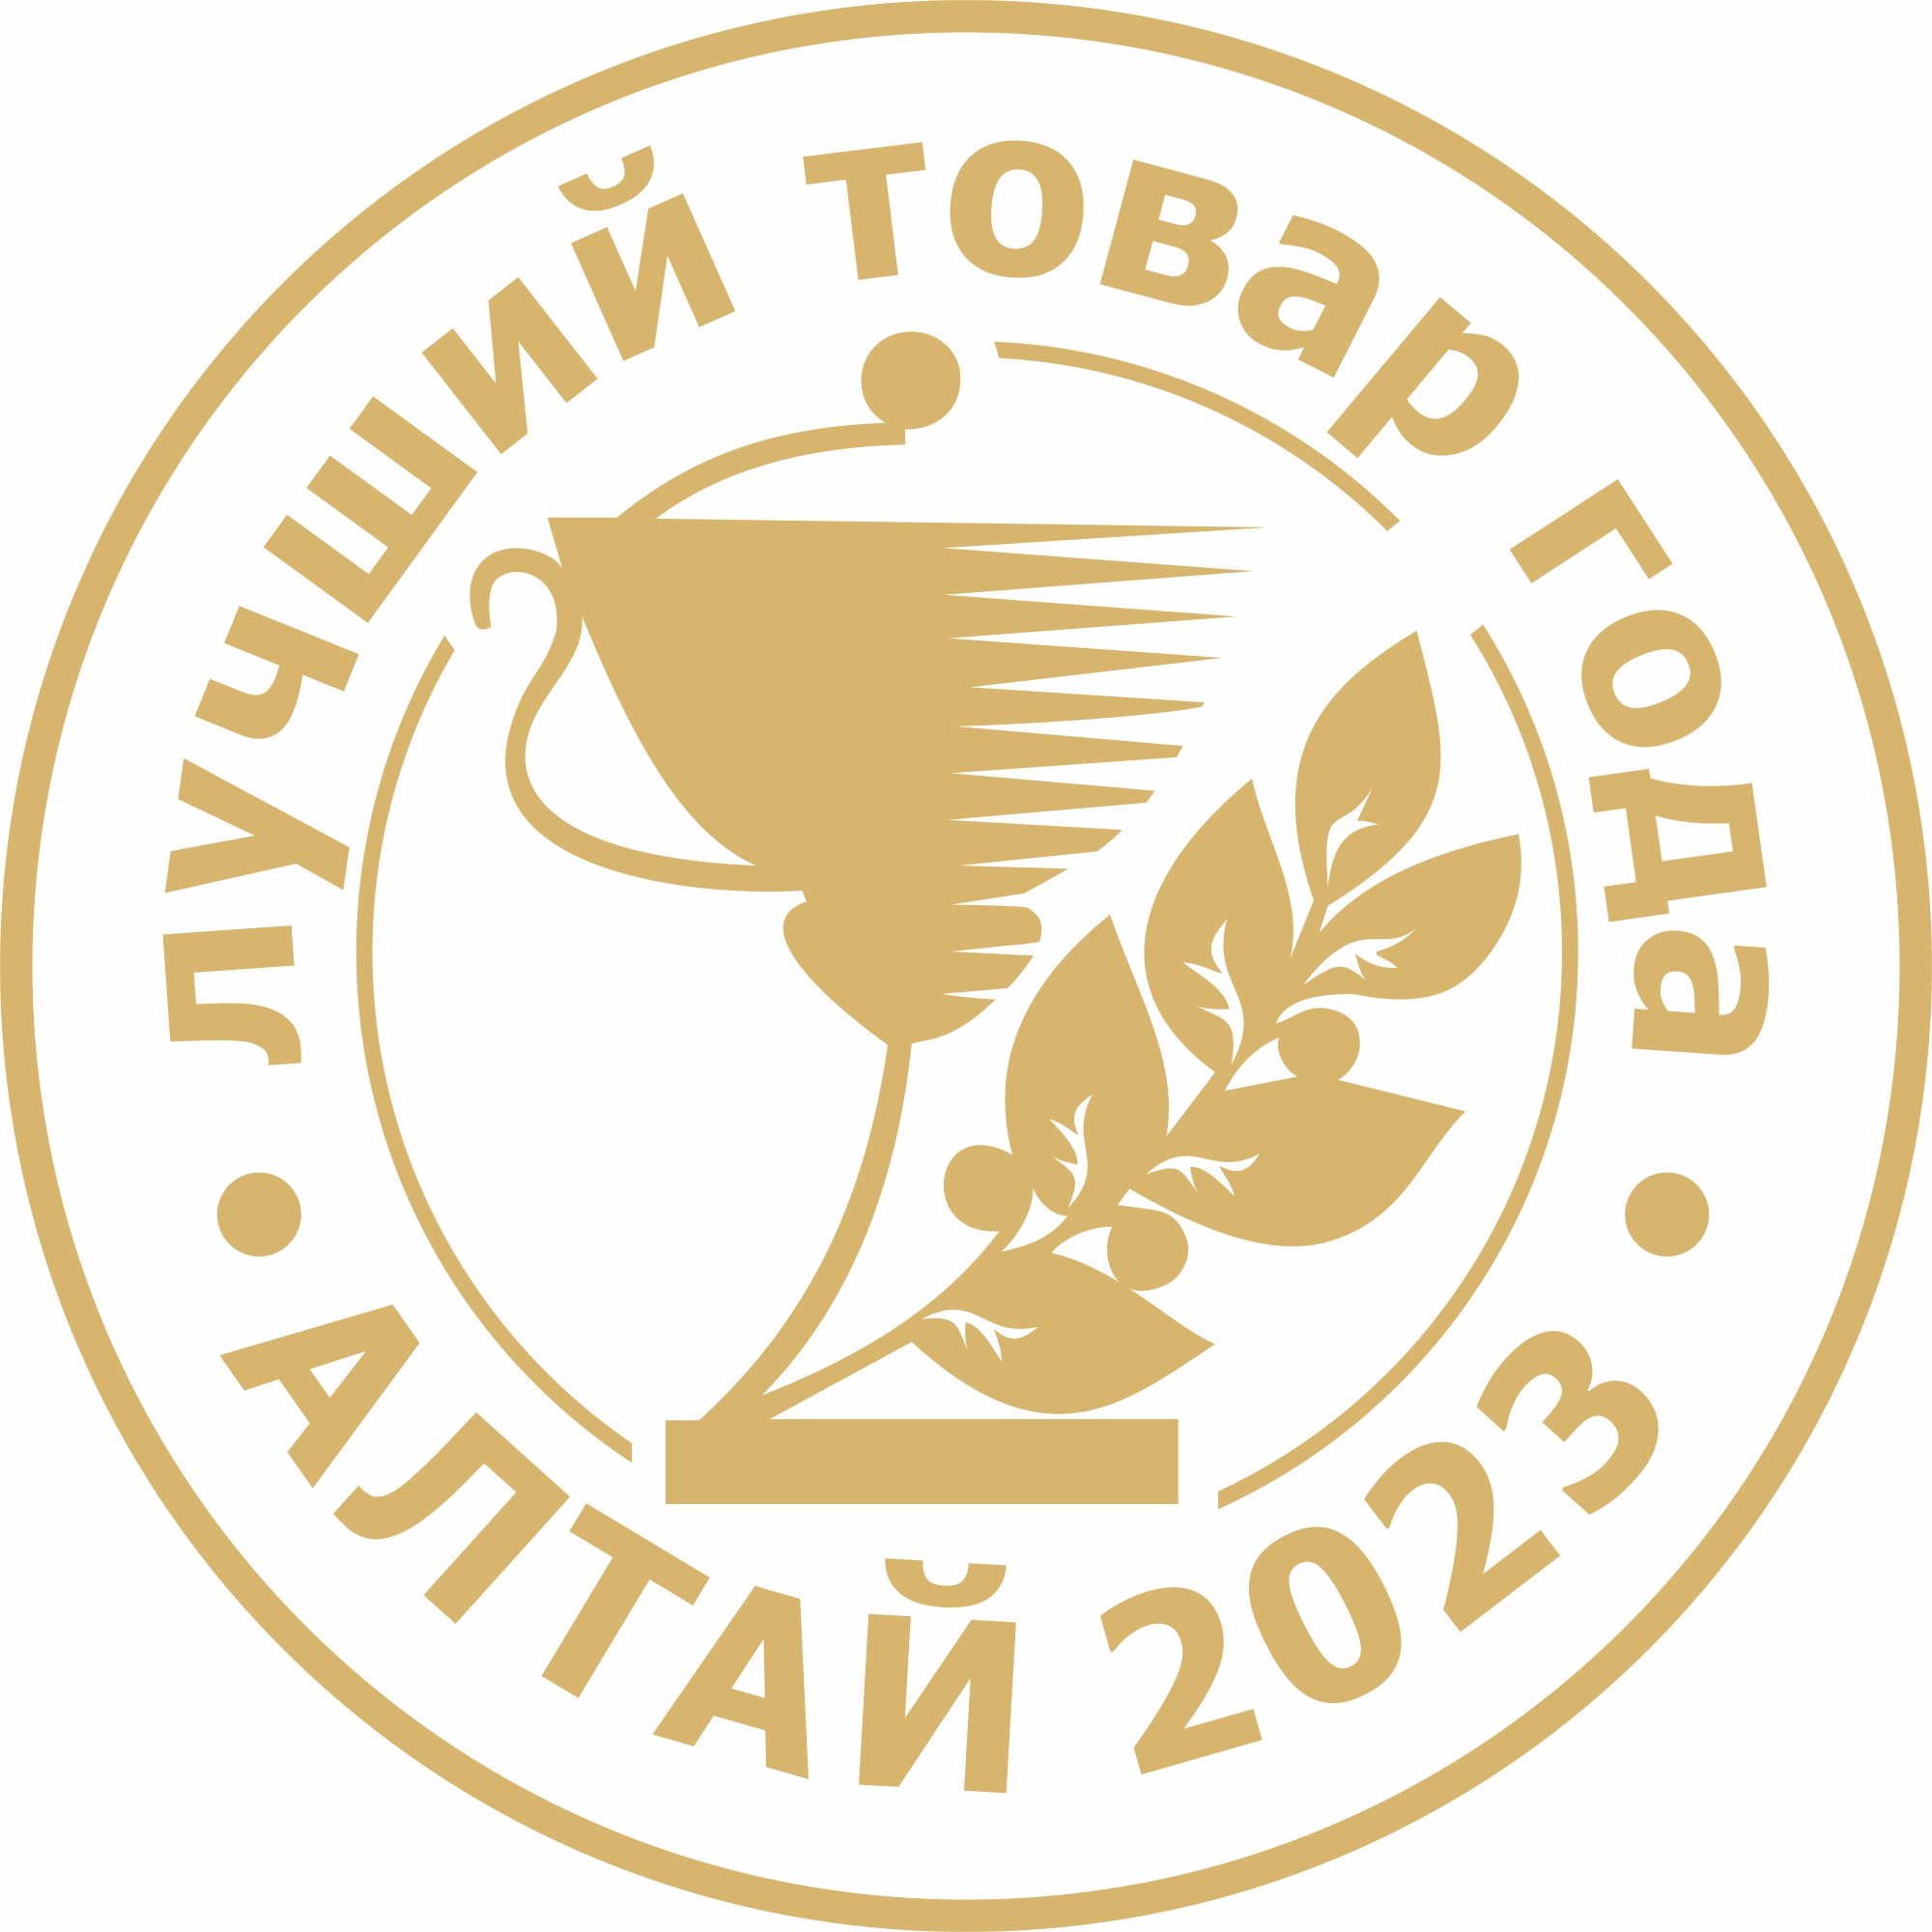 ALNAT cedar nut oil is the winner of the “BEST ALTAI PRODUCT OF 2023” award